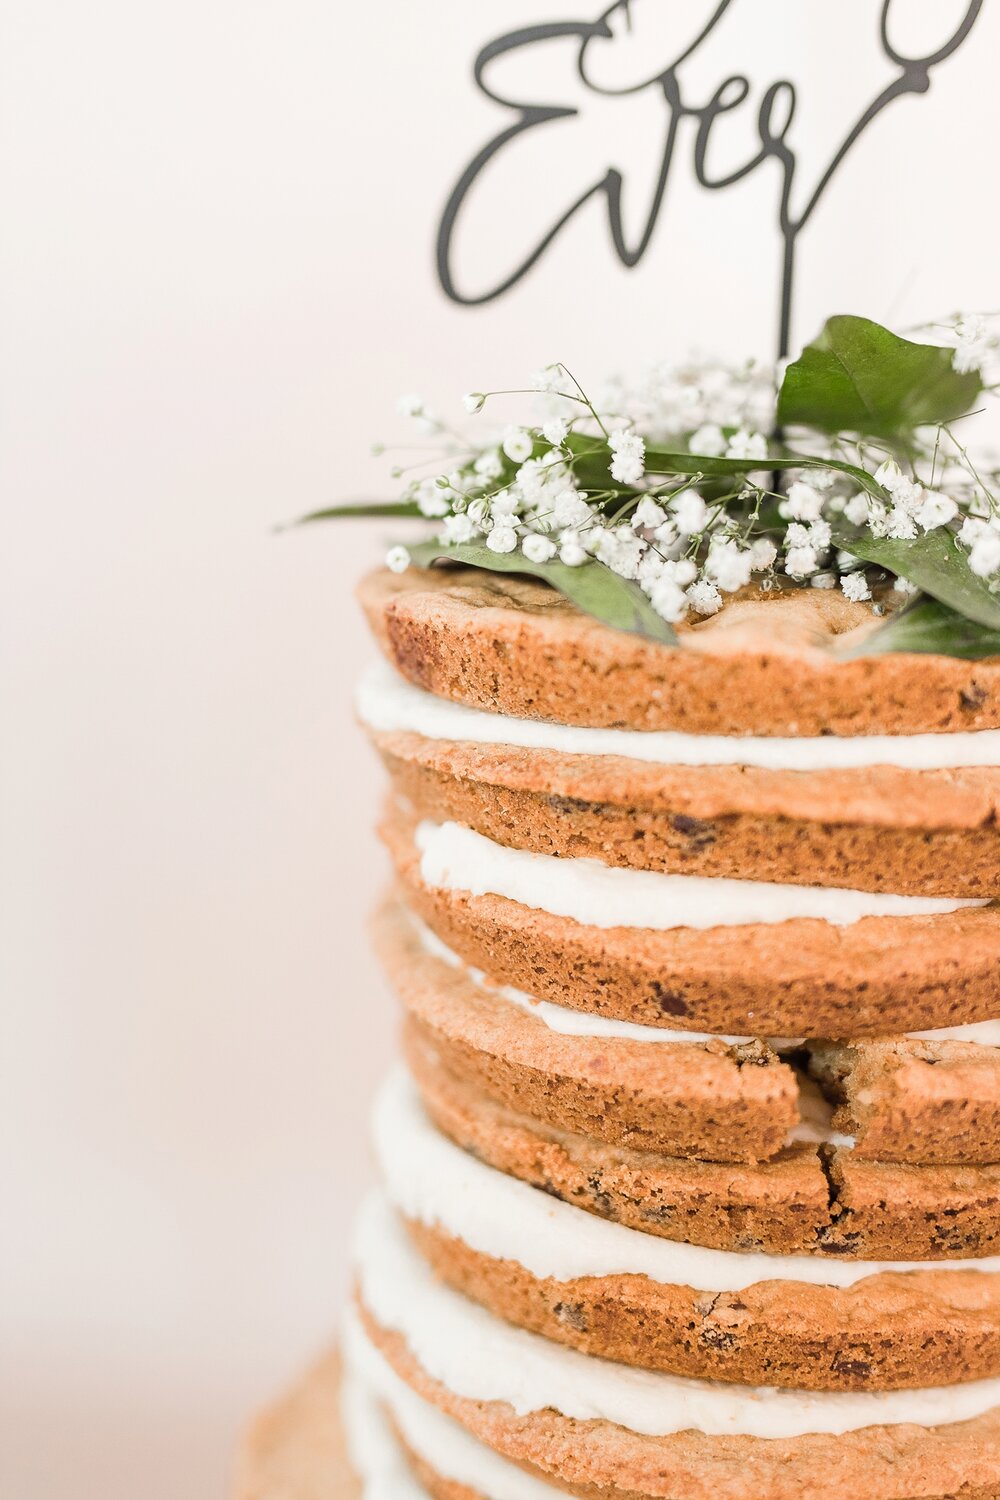  Jessica and Michael went a little different with their wedding desserts. Instead of a traditional cake, they had a giant cookie tower AND handmade ice cream cookie sandwiches in different flavors. 